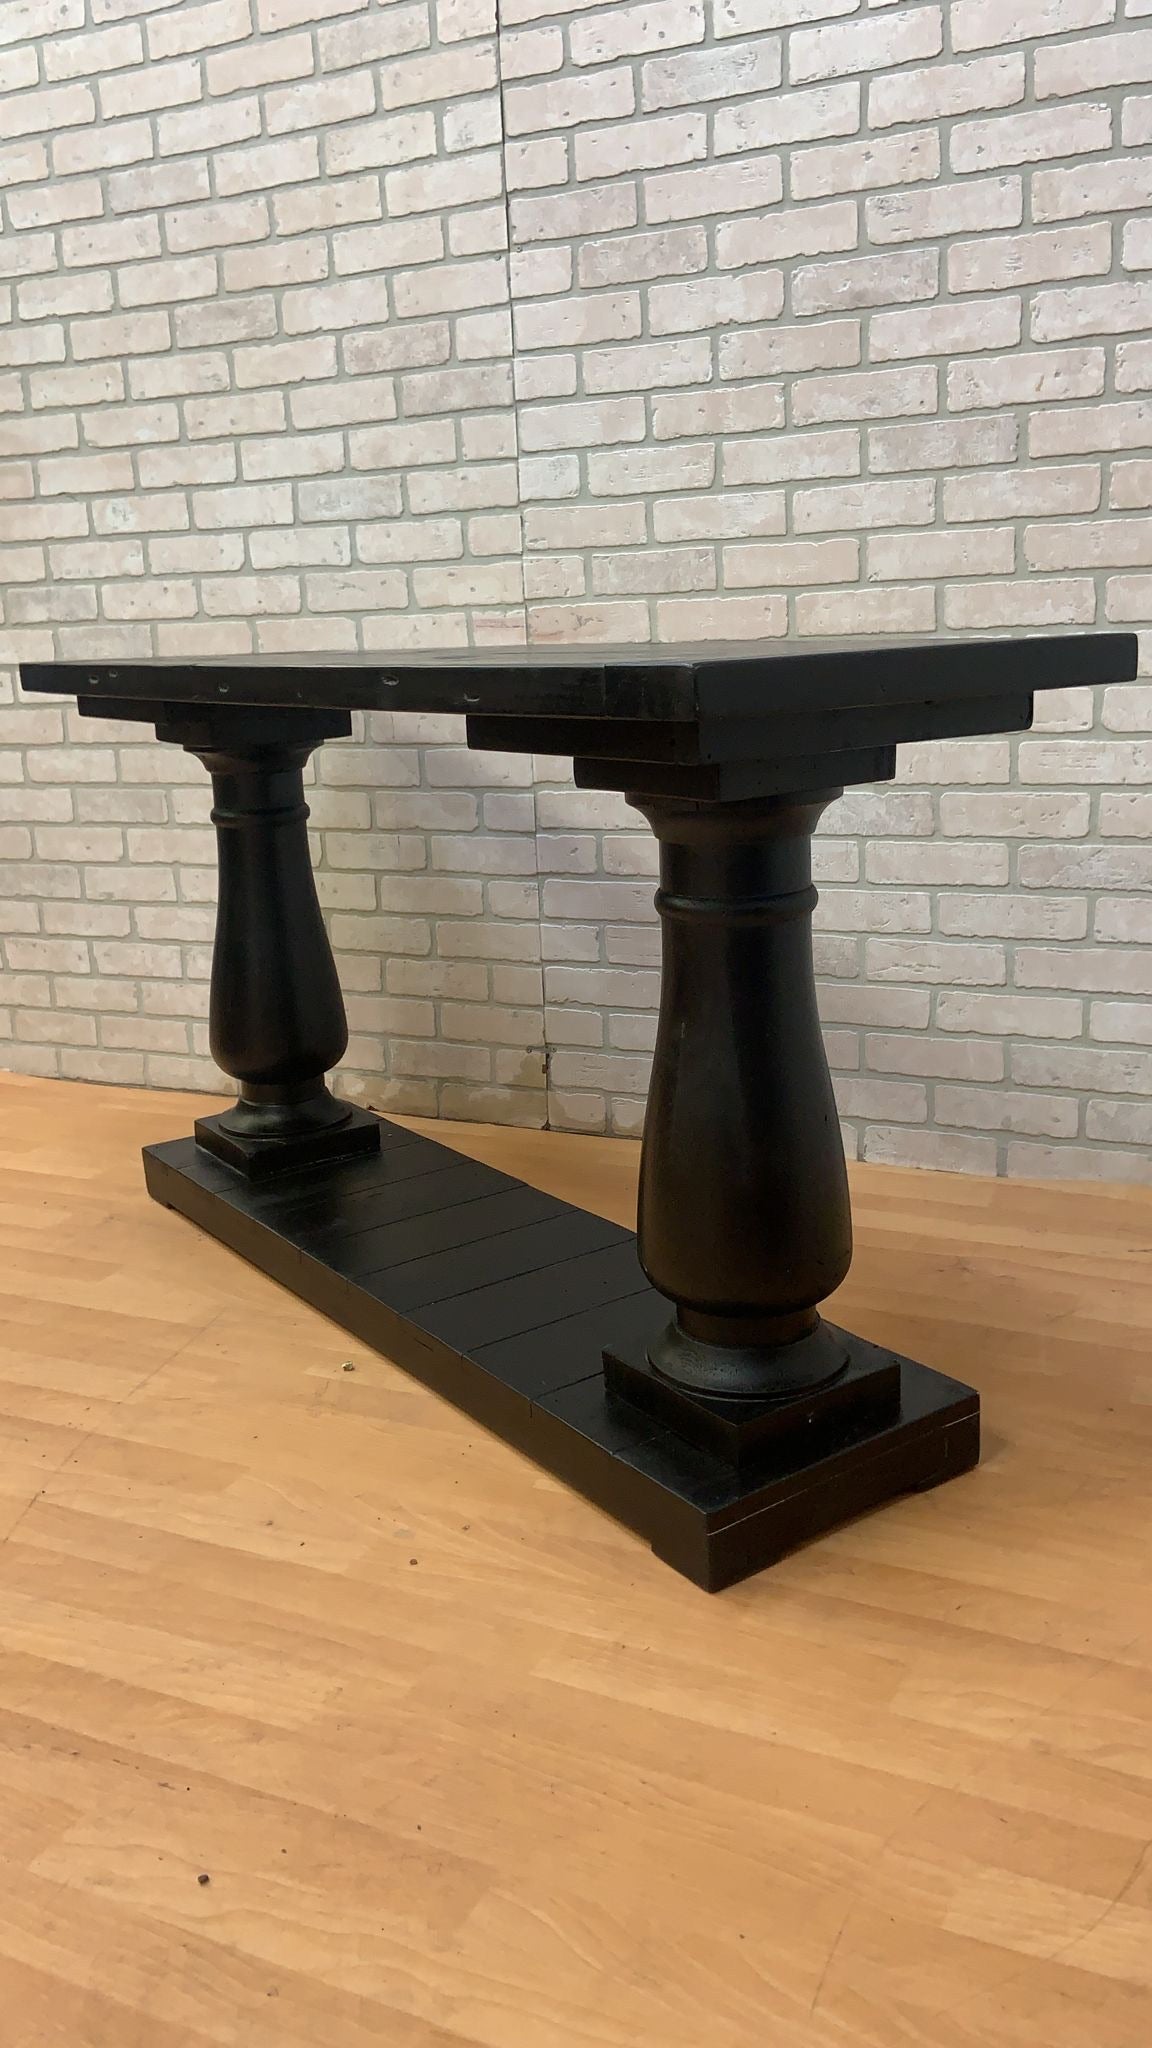 Vintage Salvaged Wood Ebony Console Table by Restoration Hardware with Balustrade Legs